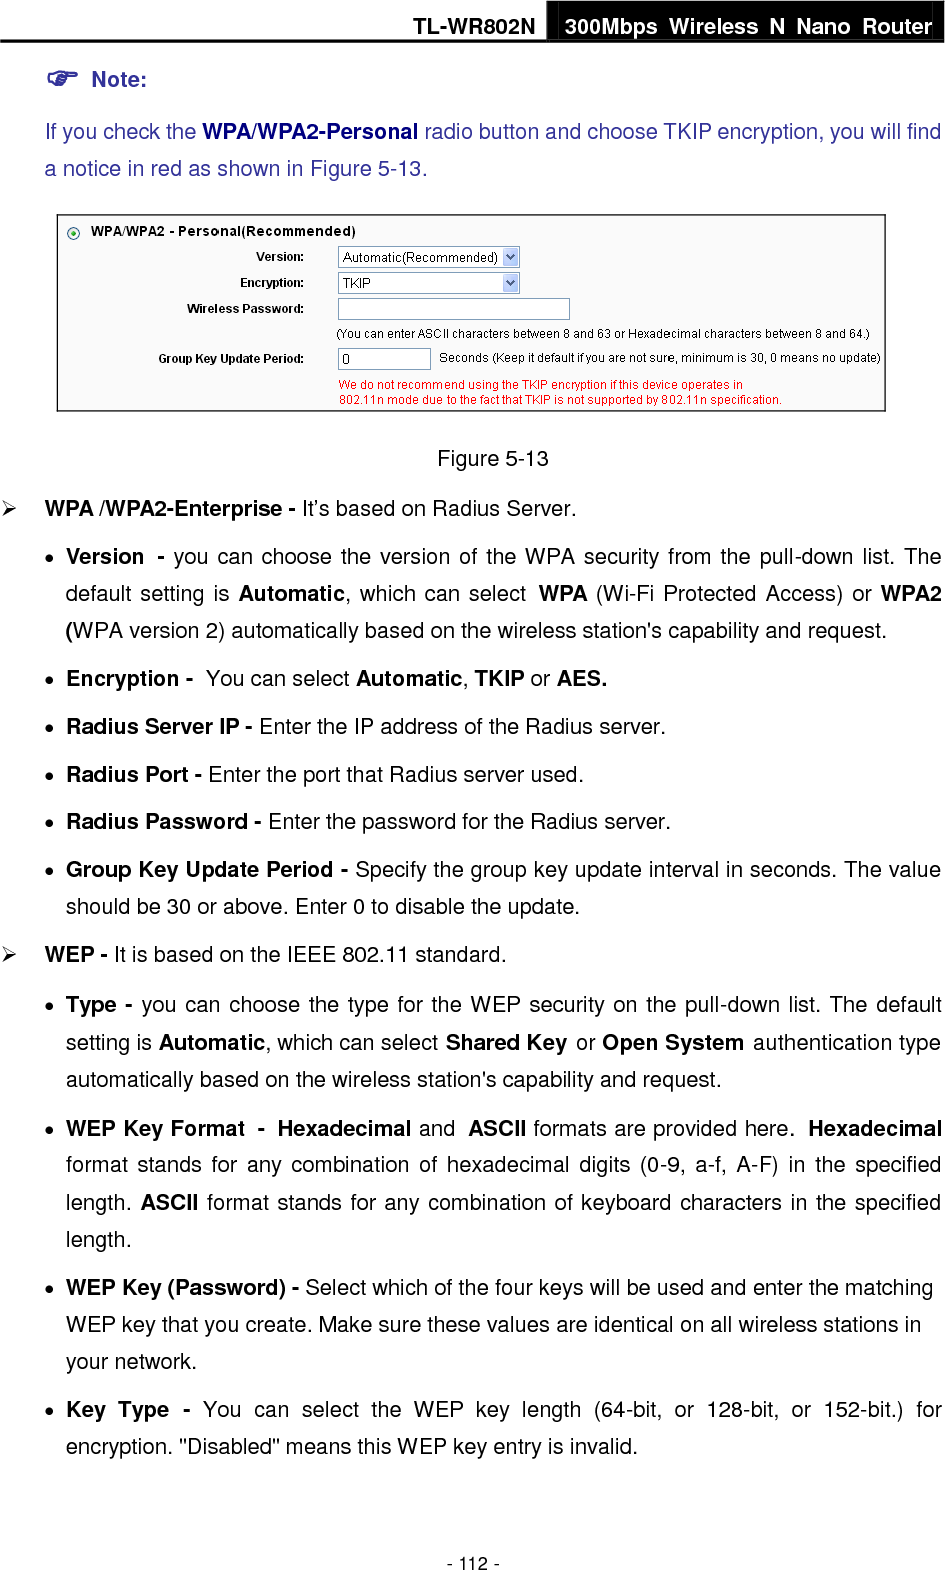 TL-WR802N 300Mbps  Wireless  N  Nano  Router  - 112 -  Note:   If you check the WPA/WPA2-Personal radio button and choose TKIP encryption, you will find a notice in red as shown in Figure 5-13.  Figure 5-13  WPA /WPA2-Enterprise - It’s based on Radius Server.  Version - you can choose the version of the WPA security from the pull-down list. The default setting is Automatic, which can select WPA (Wi-Fi Protected Access) or WPA2 (WPA version 2) automatically based on the wireless station&apos;s capability and request.  Encryption - You can select Automatic, TKIP or AES.  Radius Server IP - Enter the IP address of the Radius server.  Radius Port - Enter the port that Radius server used.  Radius Password - Enter the password for the Radius server.  Group Key Update Period - Specify the group key update interval in seconds. The value should be 30 or above. Enter 0 to disable the update.  WEP - It is based on the IEEE 802.11 standard.    Type - you can choose the type for the WEP security on the pull-down list. The default setting is Automatic, which can select Shared Key or Open System authentication type automatically based on the wireless station&apos;s capability and request.  WEP Key Format - Hexadecimal and ASCII formats are provided here. Hexadecimal format stands  for any  combination of  hexadecimal digits  (0-9, a-f,  A-F)  in  the specified length. ASCII format stands for any combination of keyboard characters in the specified length.    WEP Key (Password) - Select which of the four keys will be used and enter the matching WEP key that you create. Make sure these values are identical on all wireless stations in your network.    Key  Type -  You  can  select  the  WEP  key  length  (64-bit,  or  128-bit,  or  152-bit.)  for encryption. &quot;Disabled&quot; means this WEP key entry is invalid. 